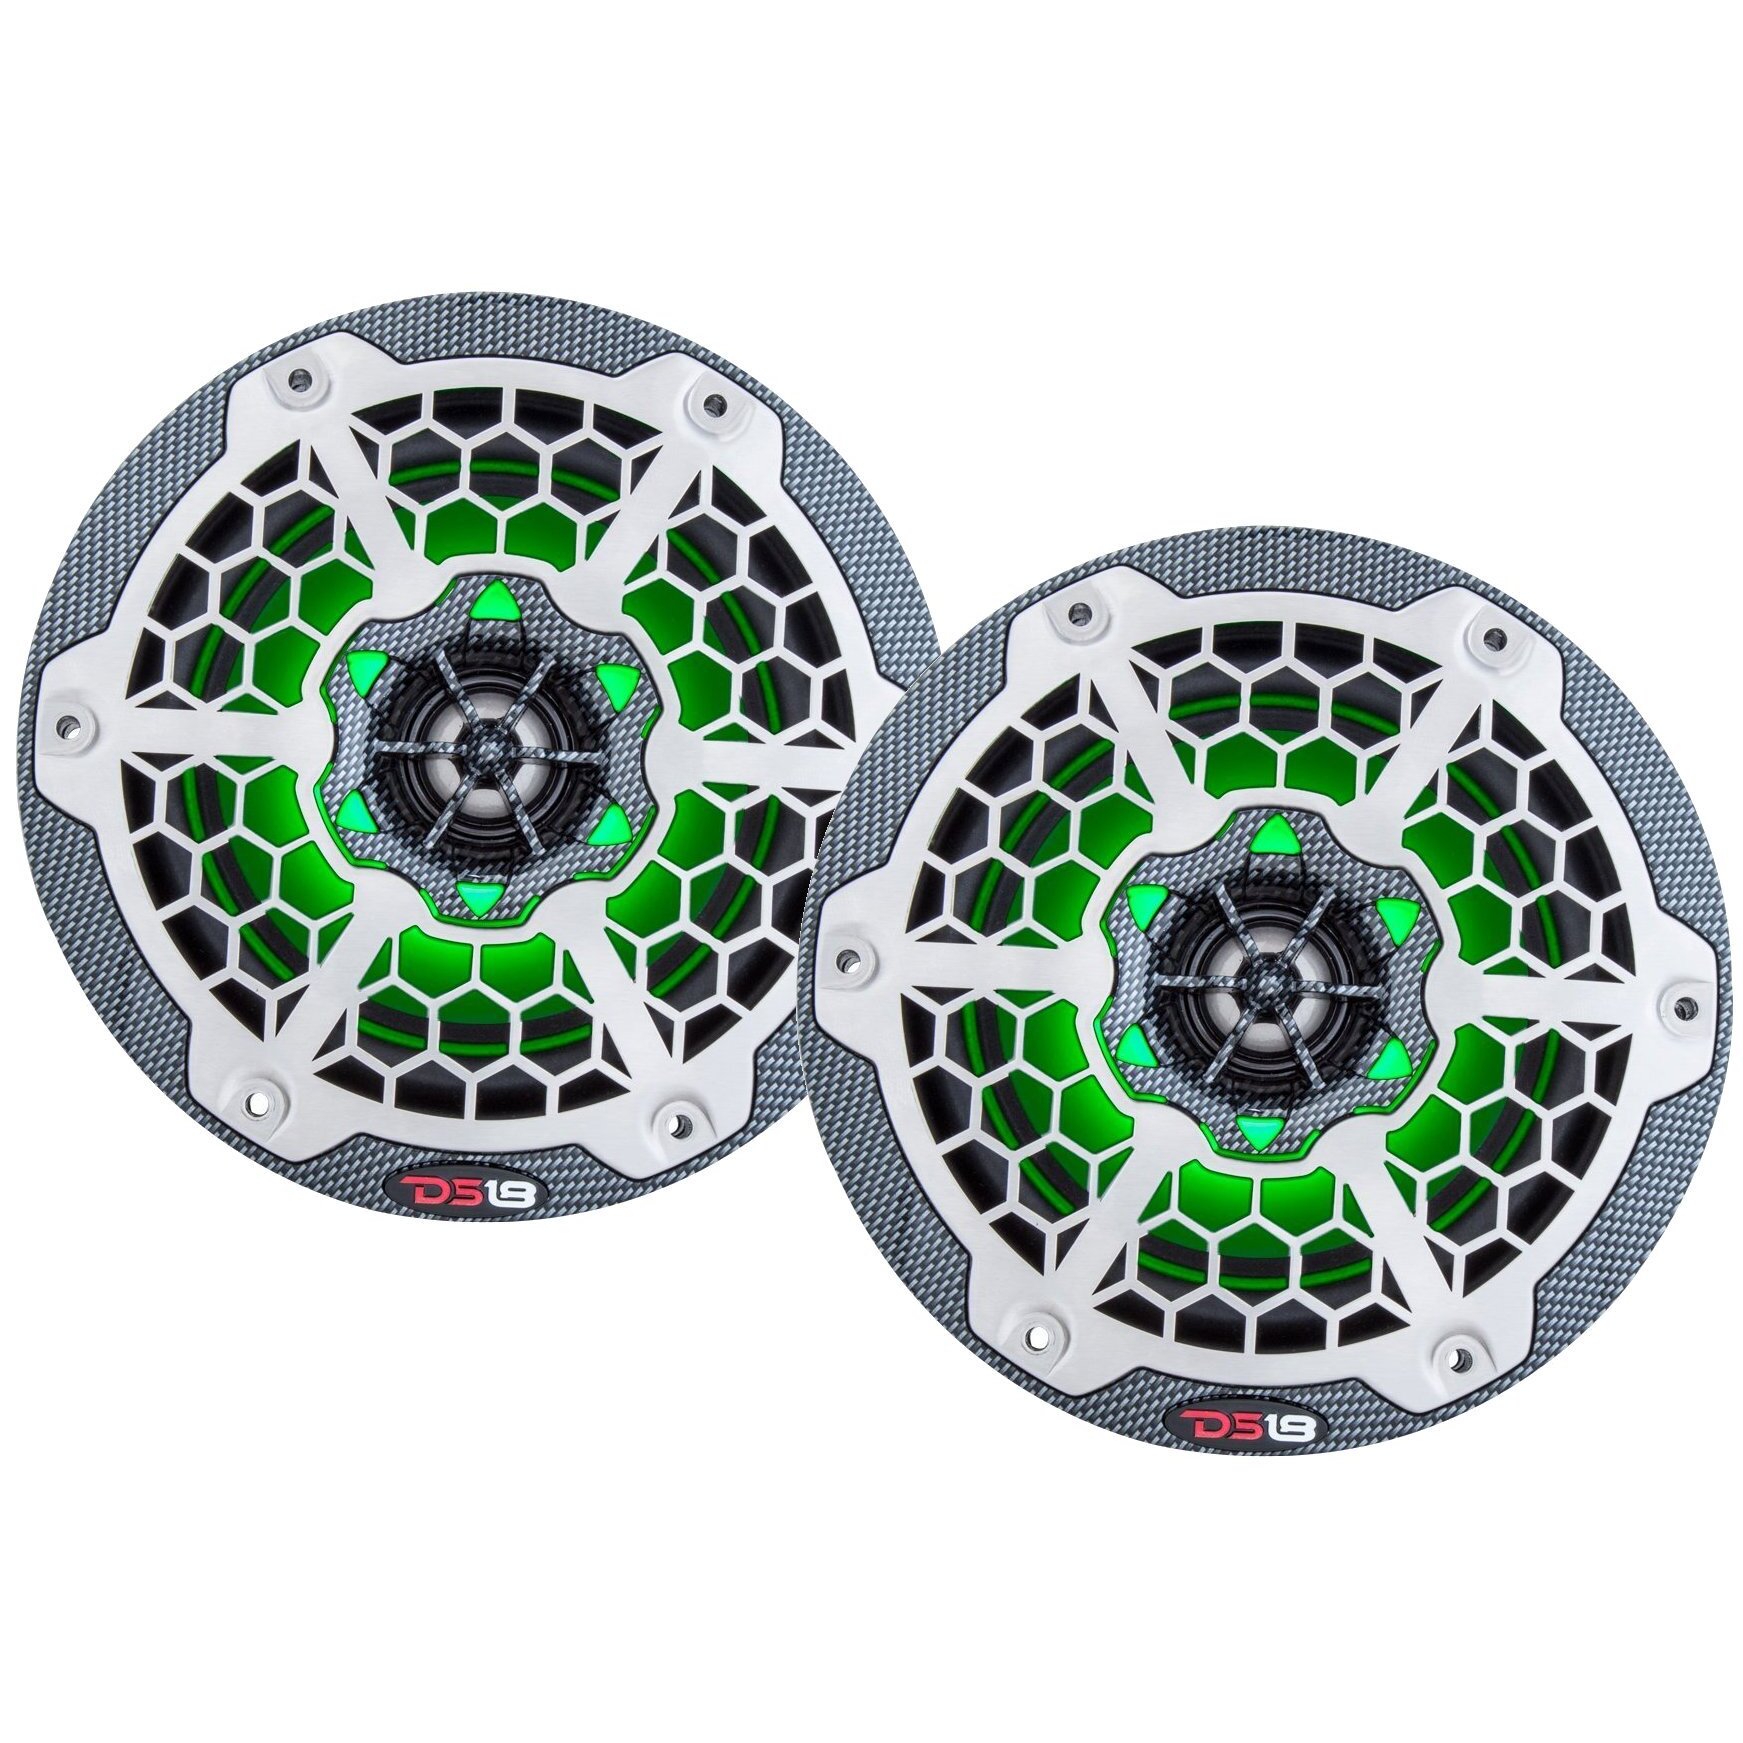 DS18 CF65 Black And Silver 6.5" 375 Watt Waterproof Marine Speakers With RGB LED Accent Lighting